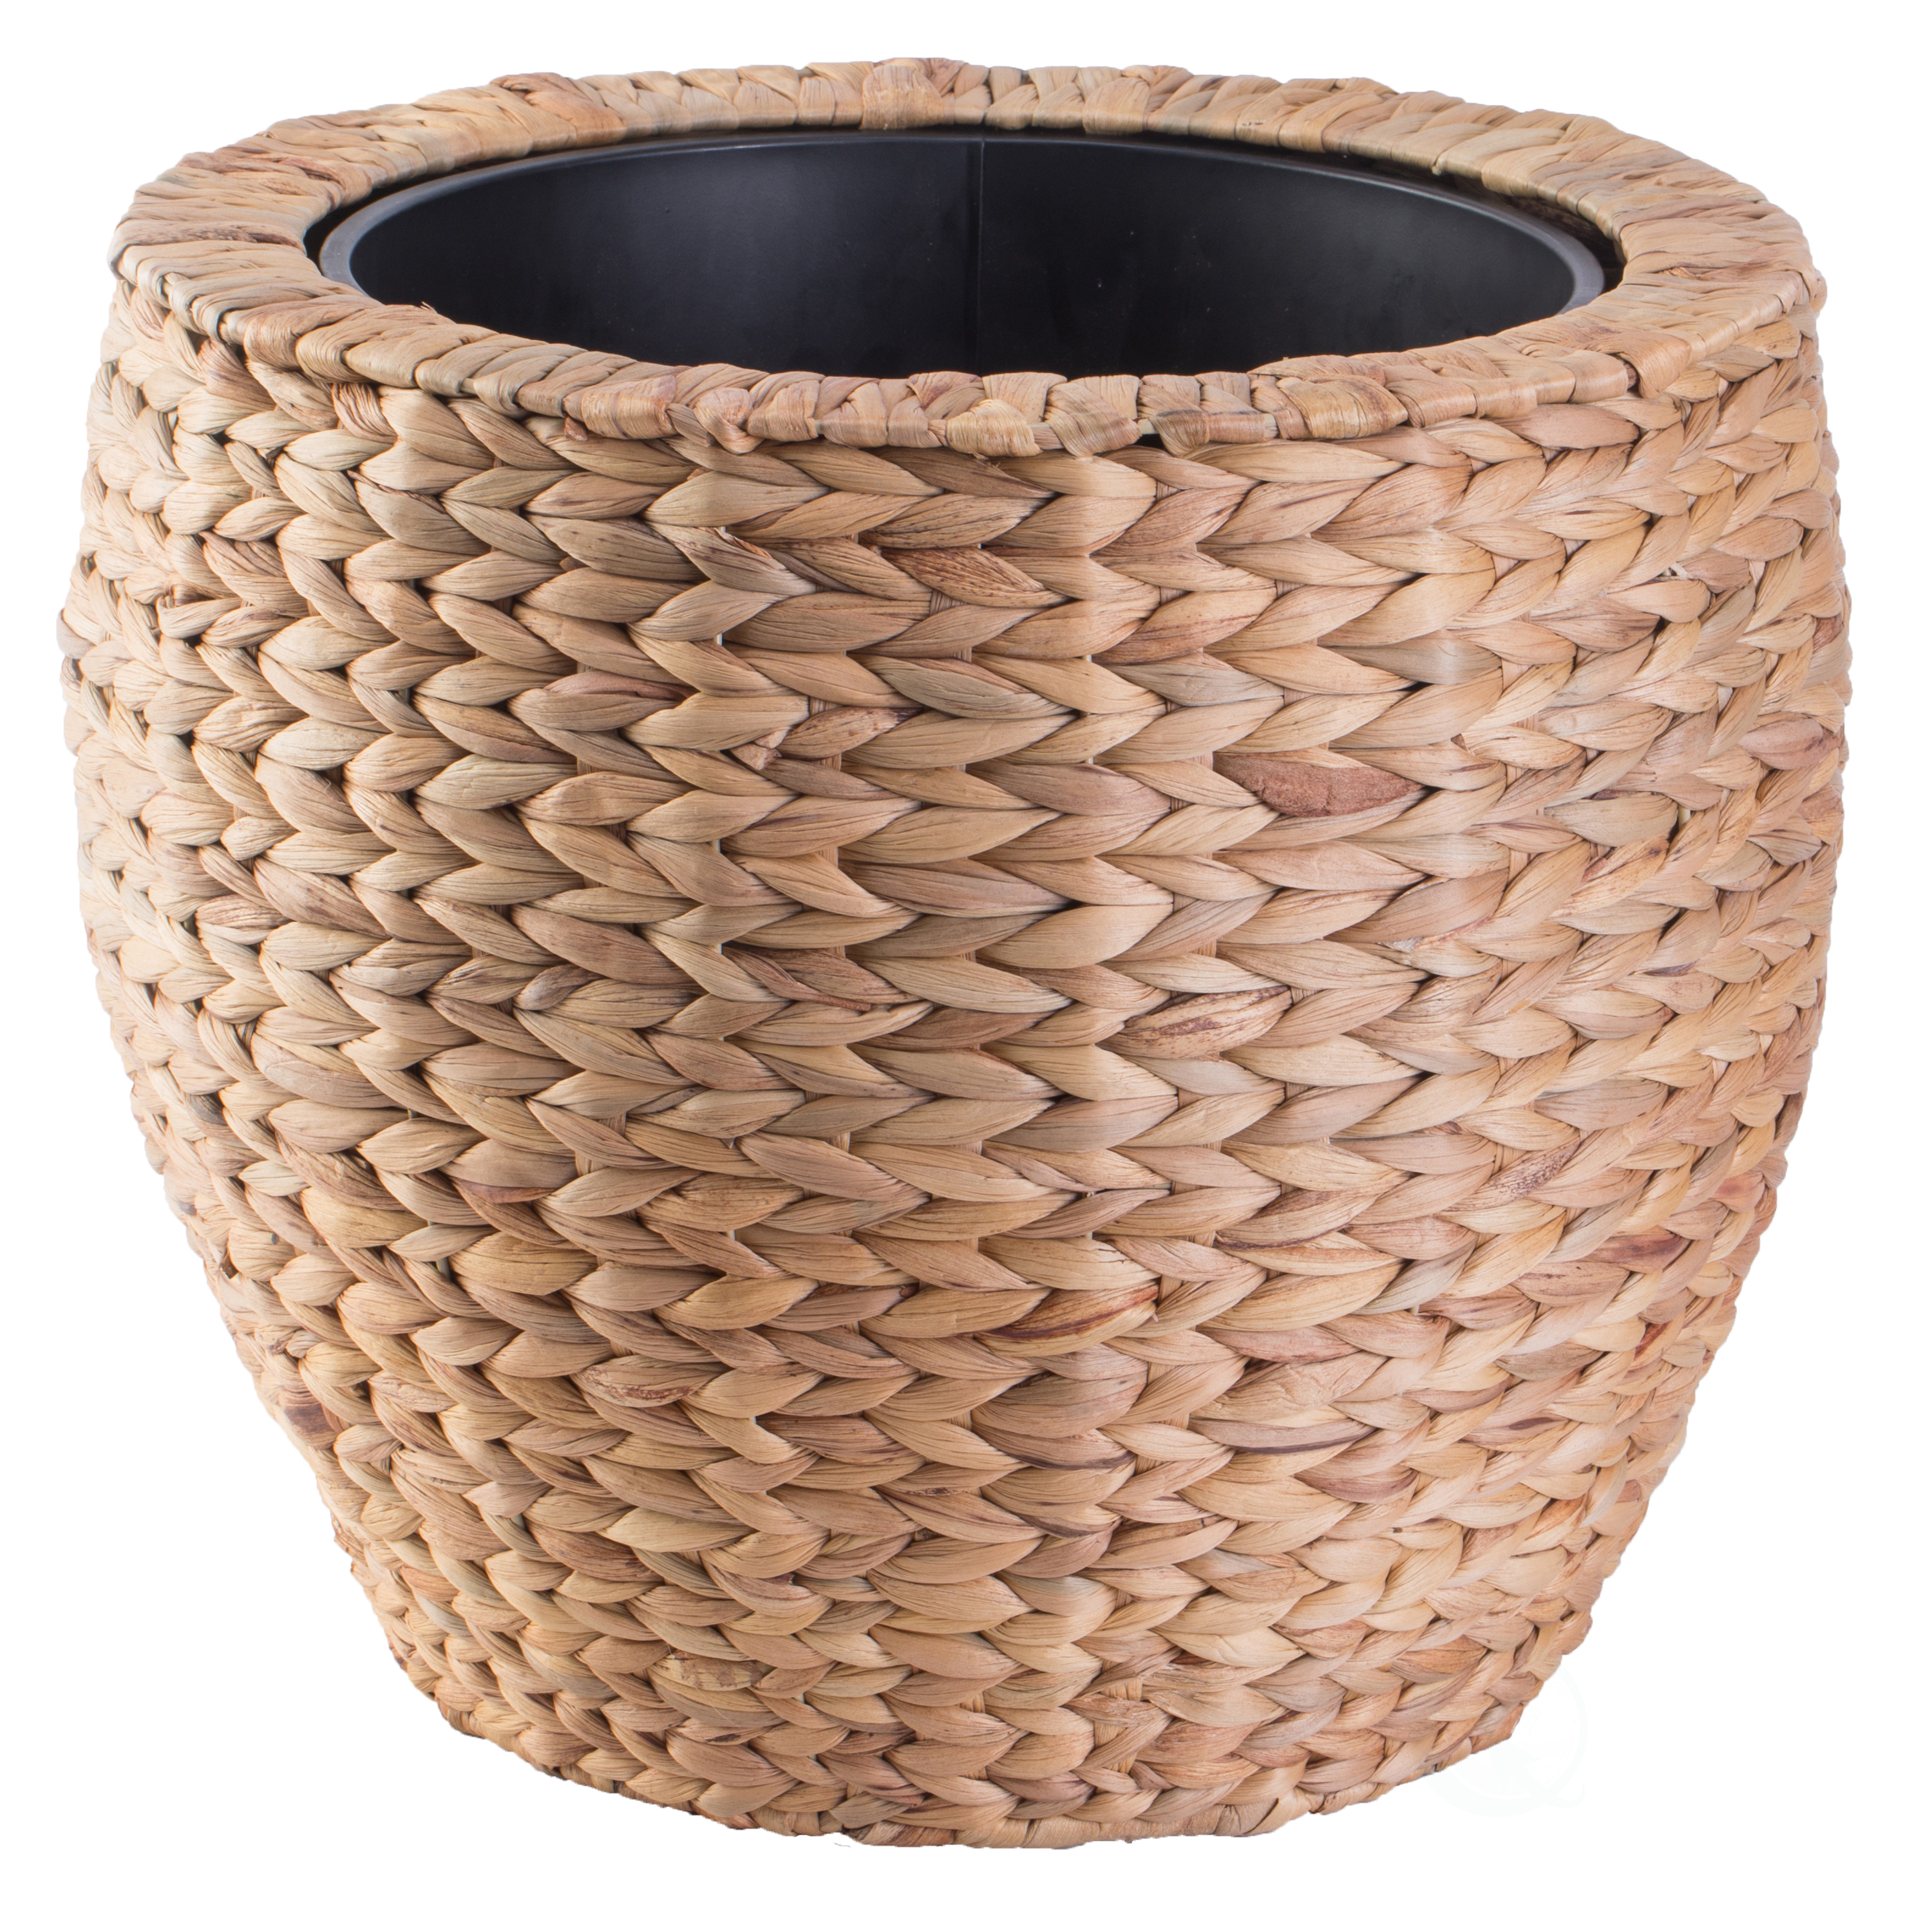 Water Hyacinth Round Floor Planter With Metal Pot - Large